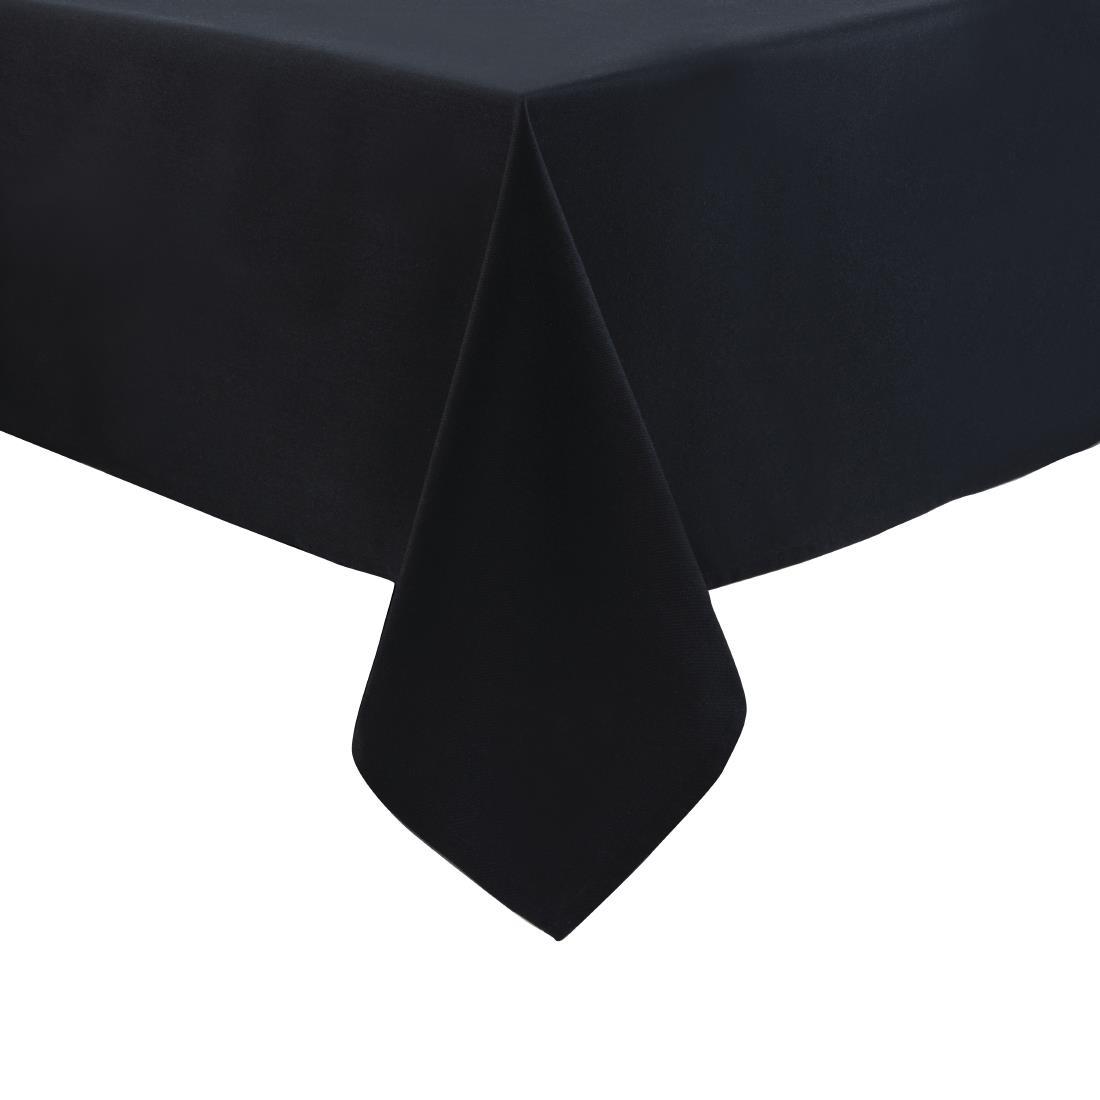 Occasions Tablecloth Black 1350 x 1350mm - HB563  - 1